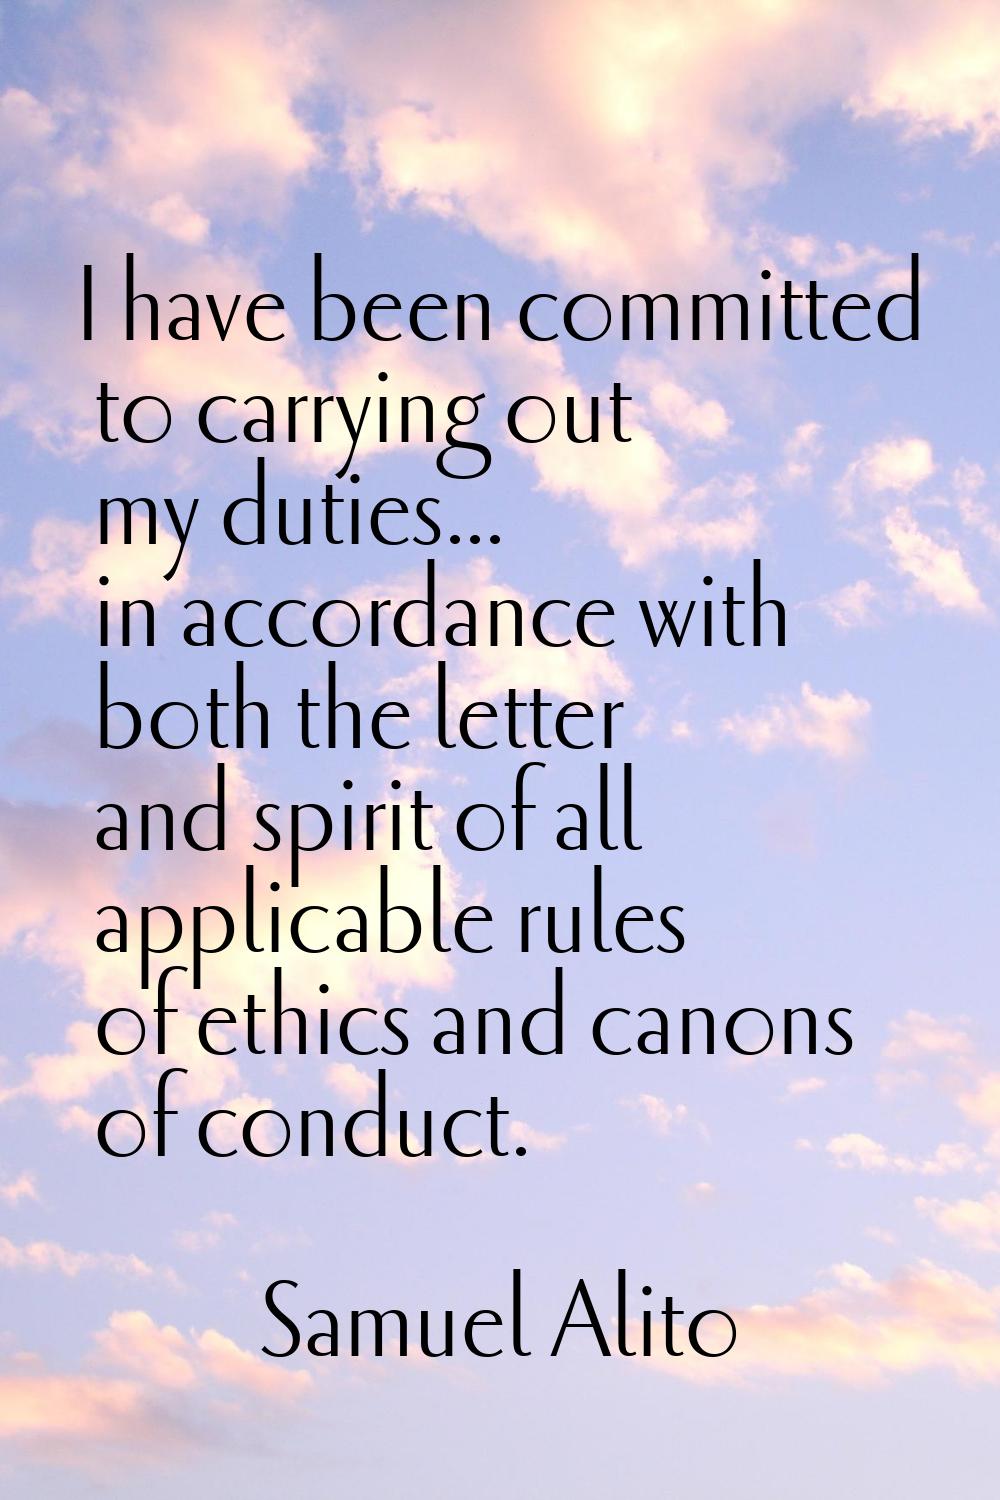 I have been committed to carrying out my duties... in accordance with both the letter and spirit of